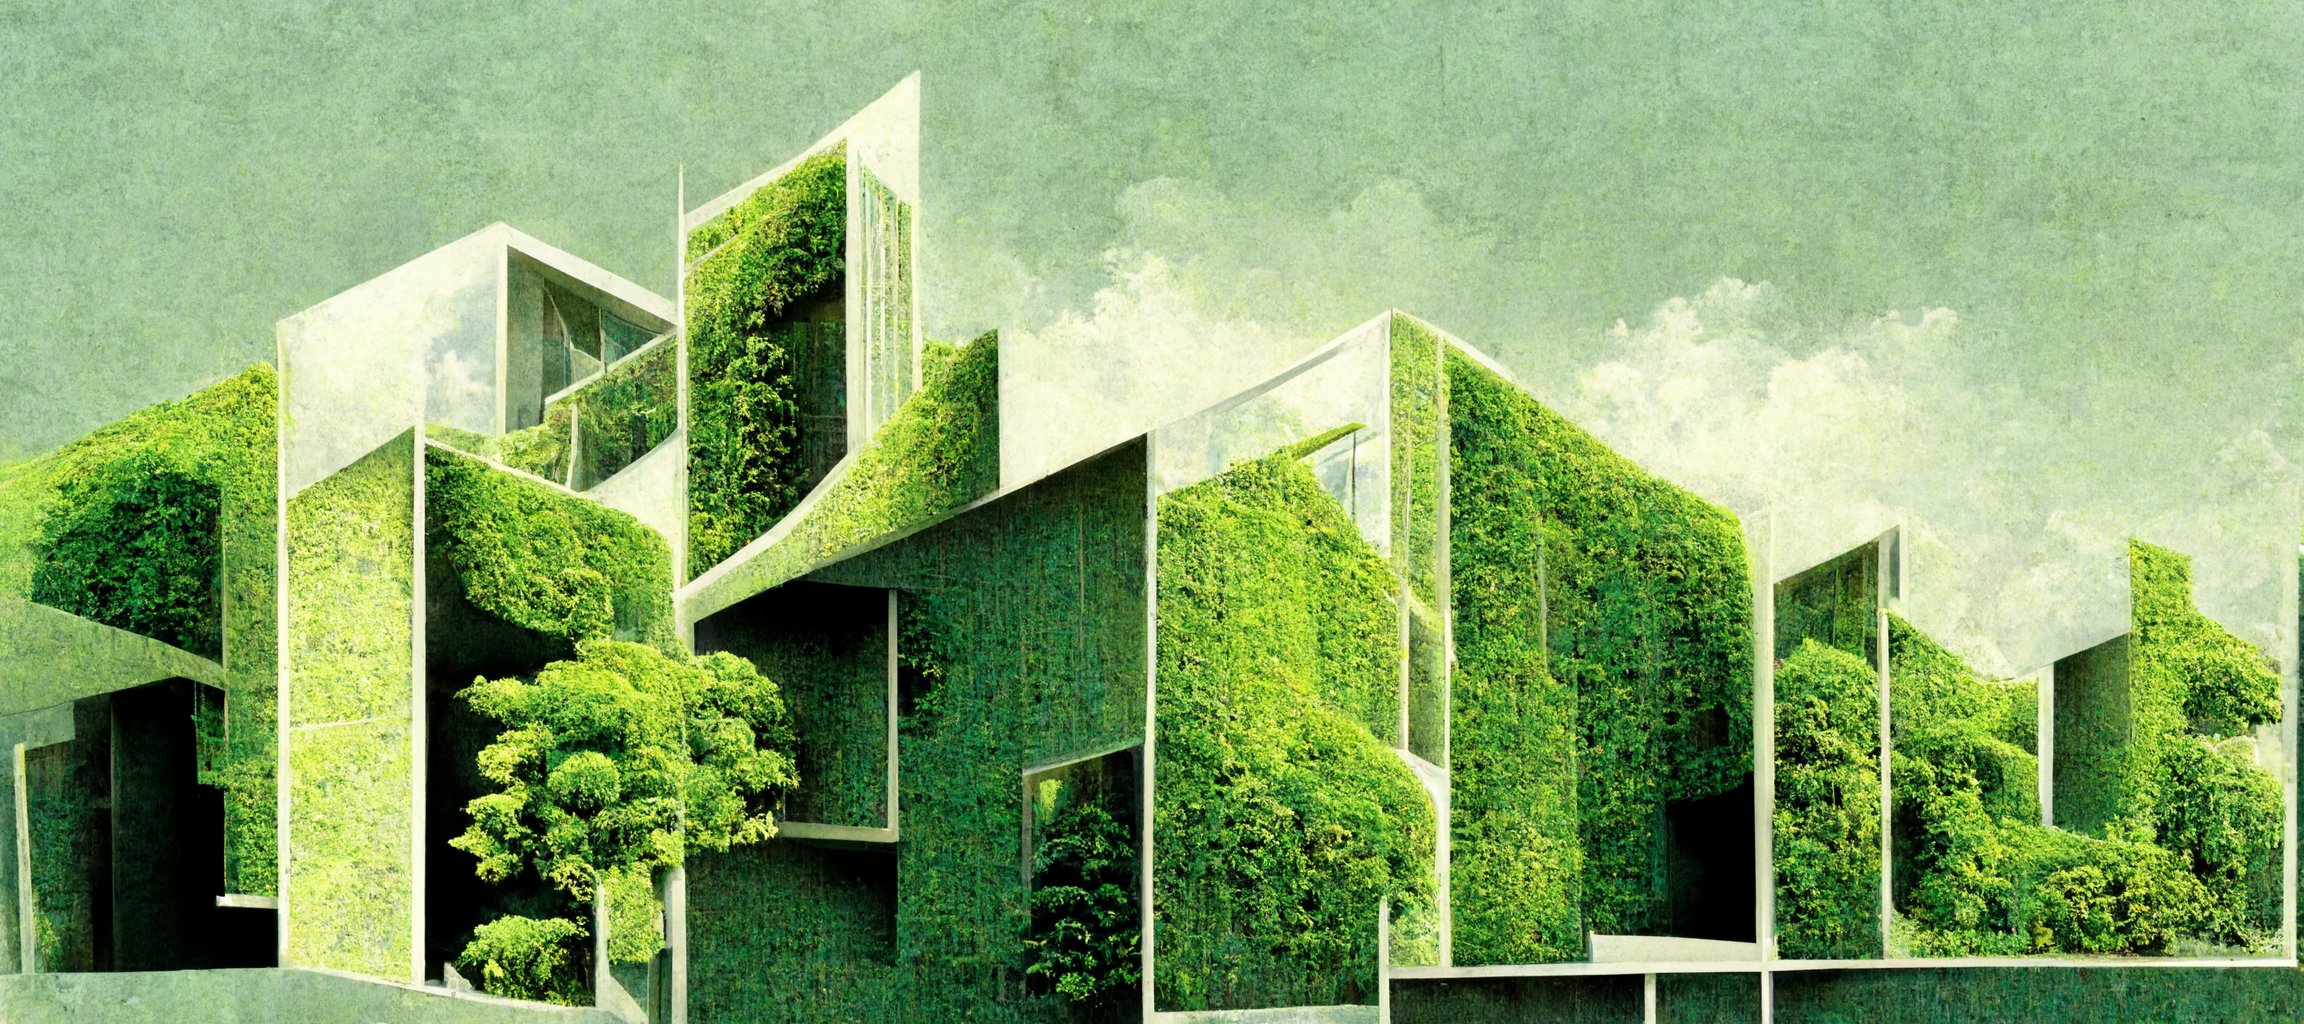 Sustainability of the Built Environment: Philosophy and Practice